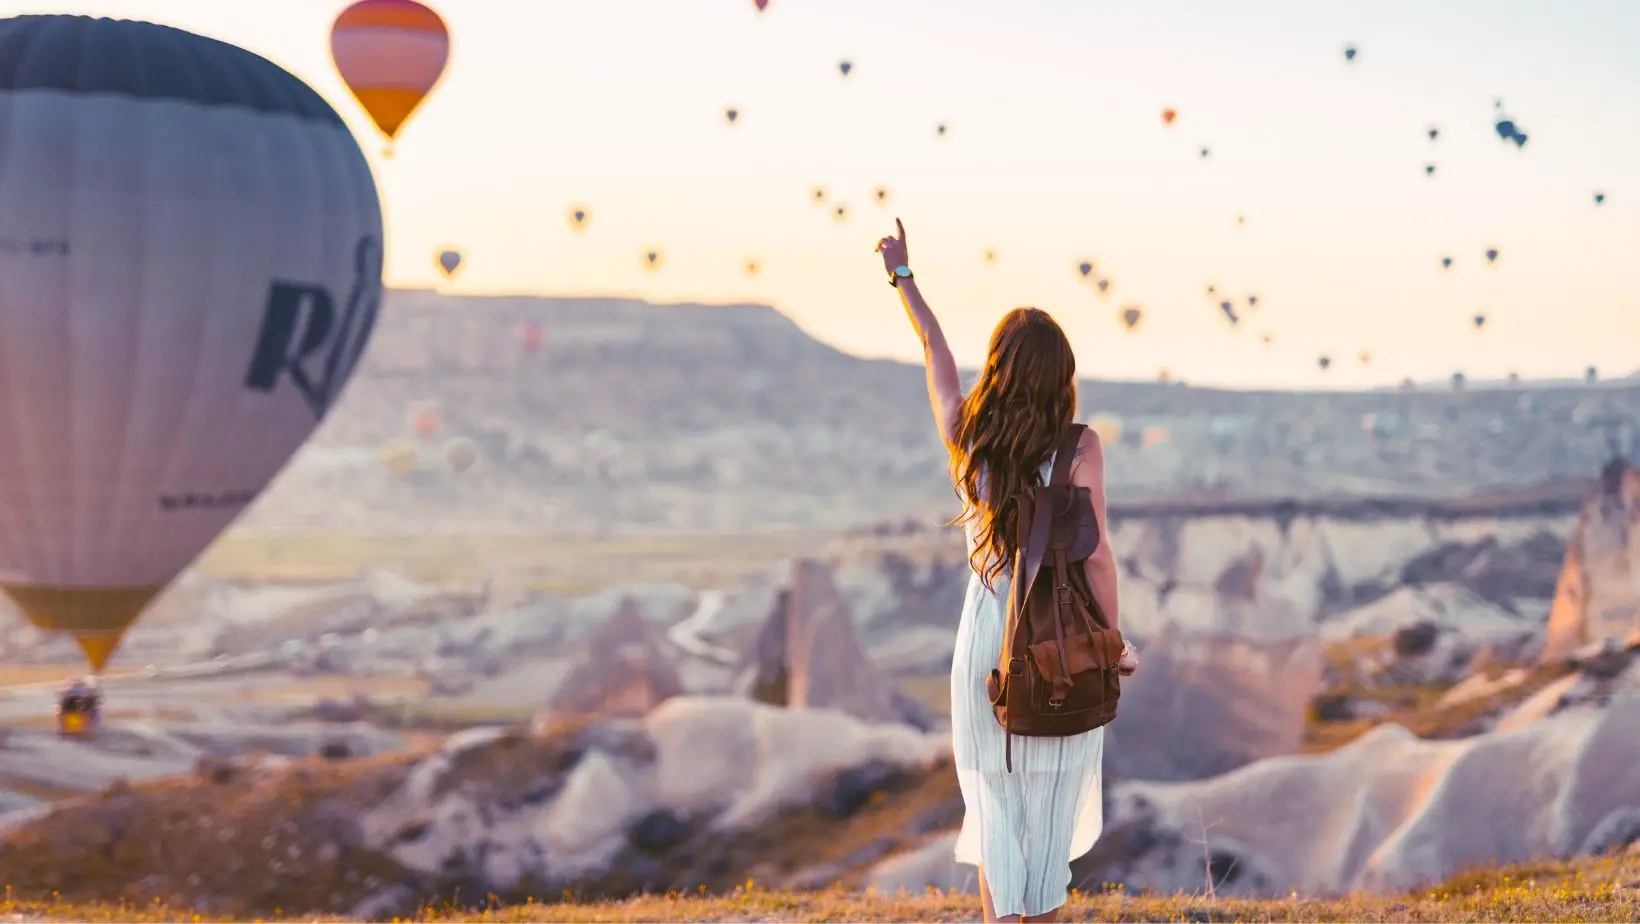 Cappadocia Red Tour : Important Details You Need To Know